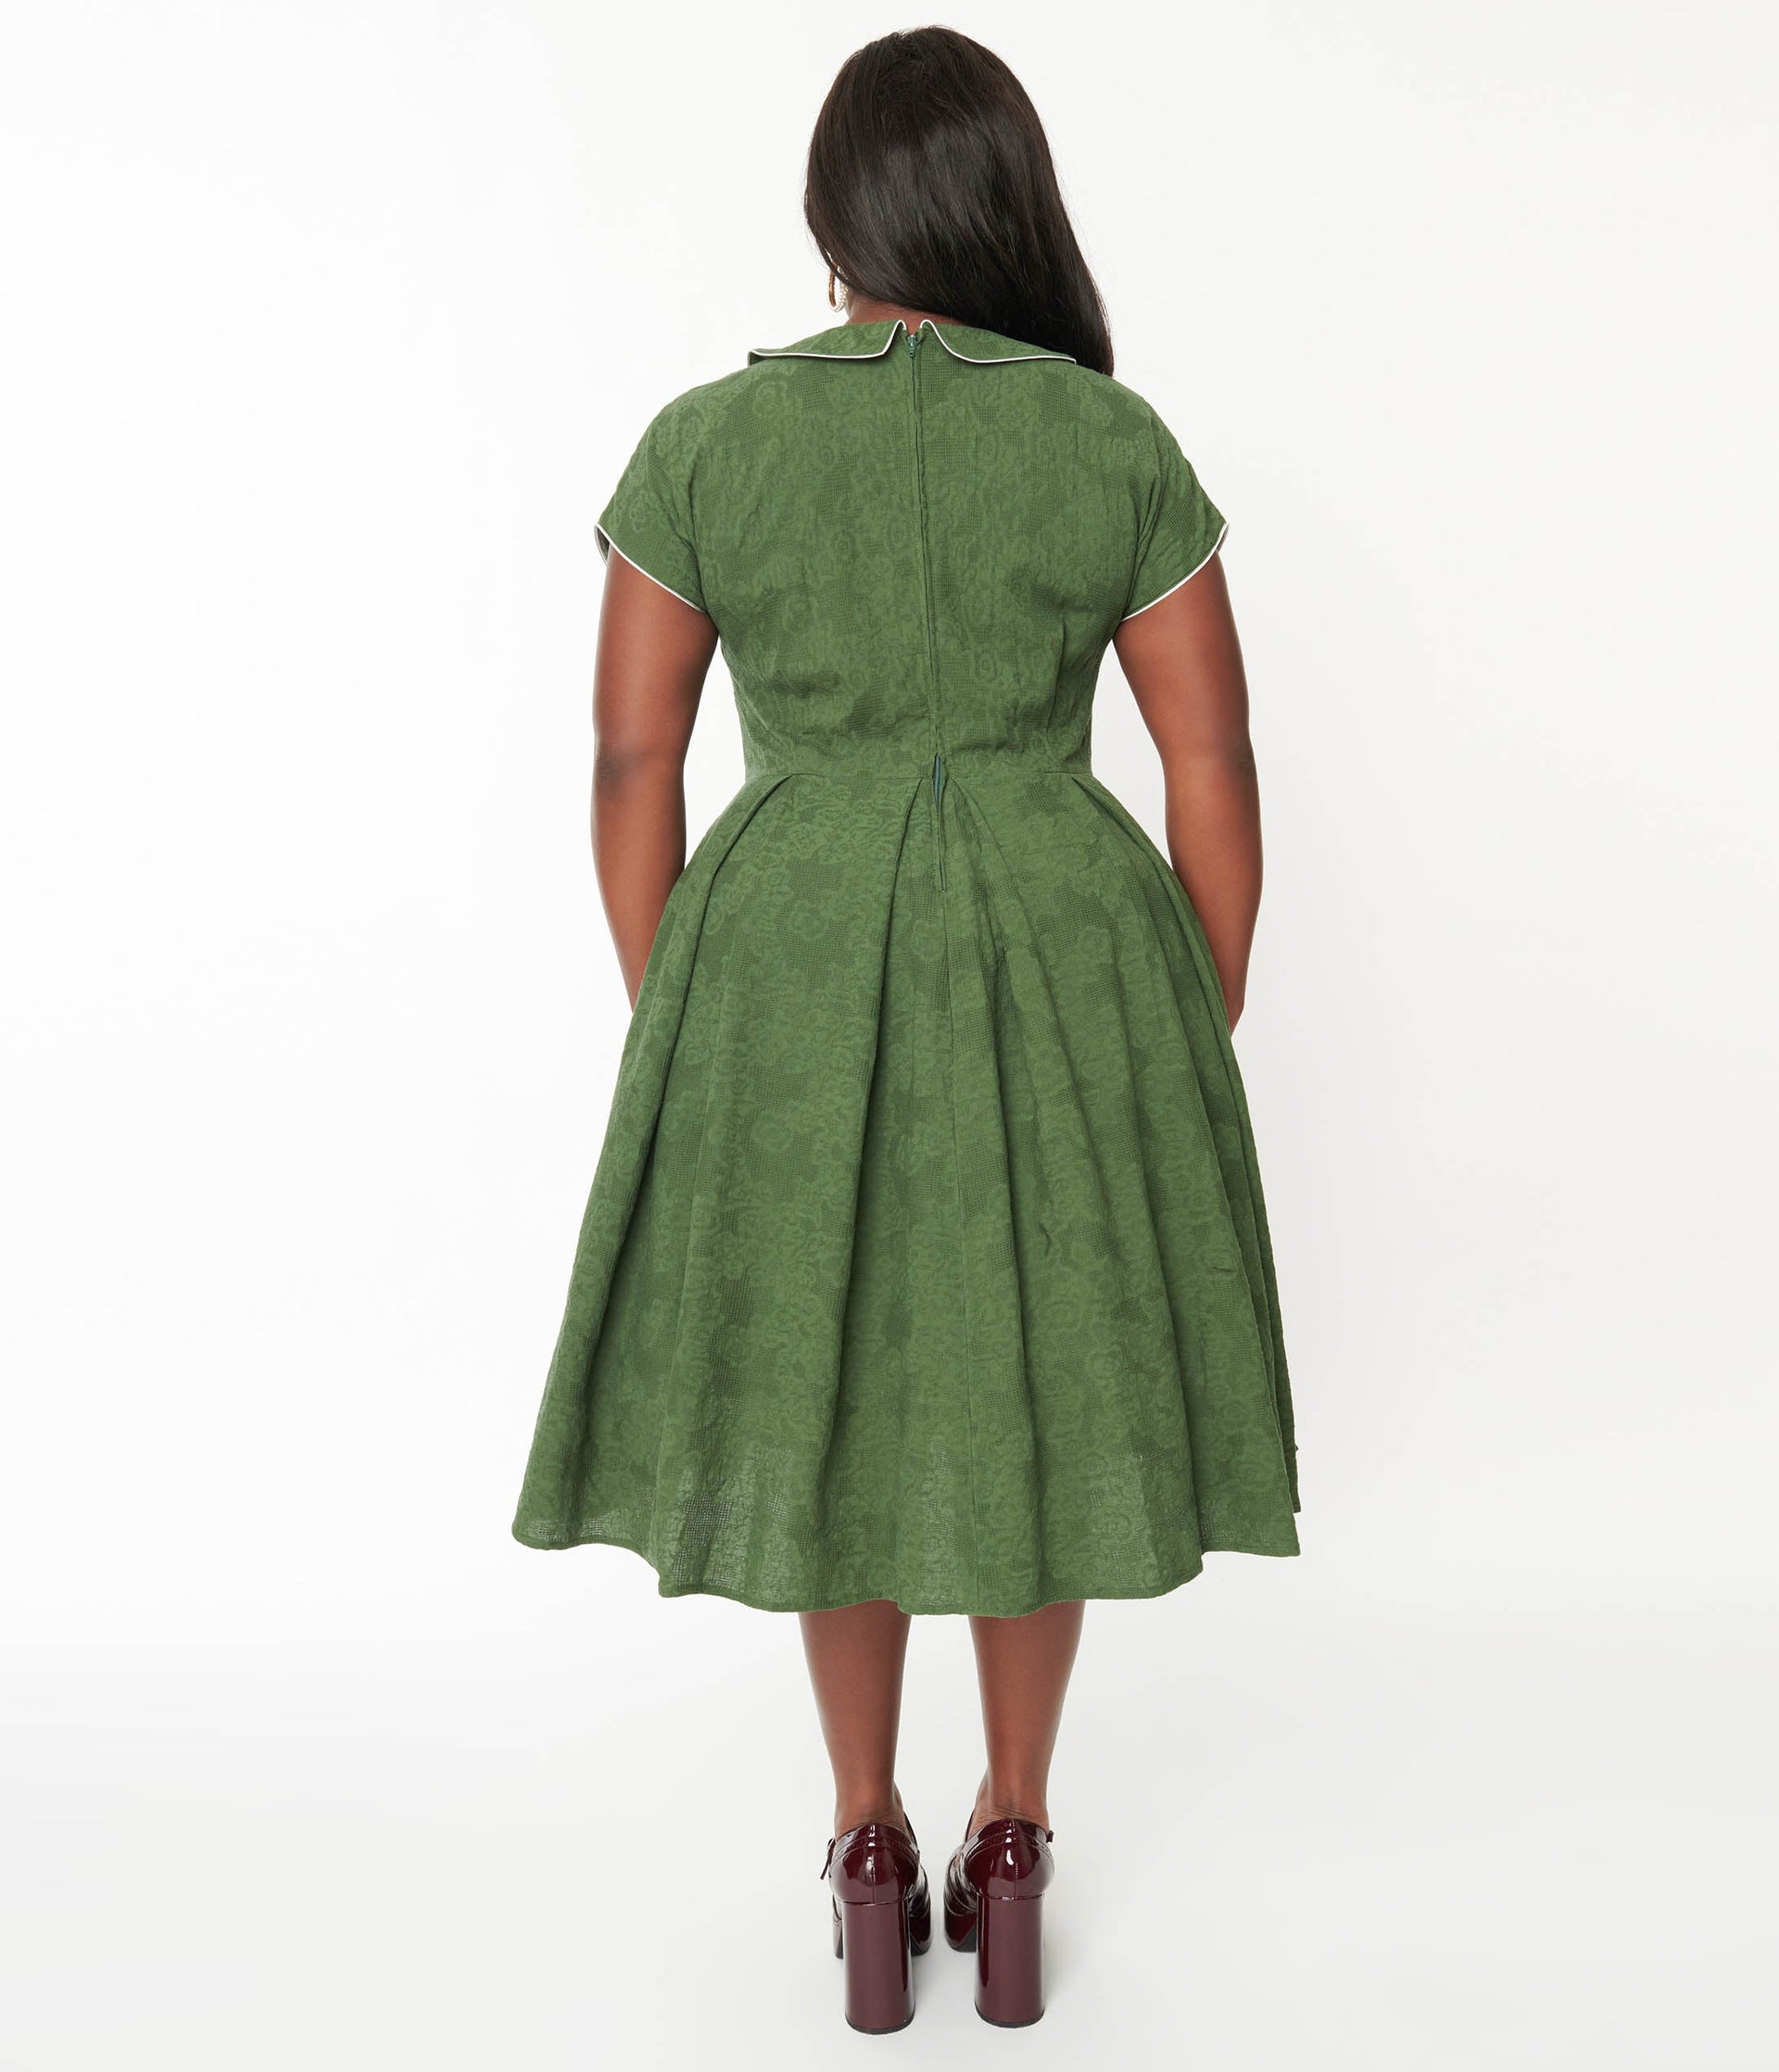 Unique Vintage Plus Size Emerald Green Delores Swing Dress with Sleeve